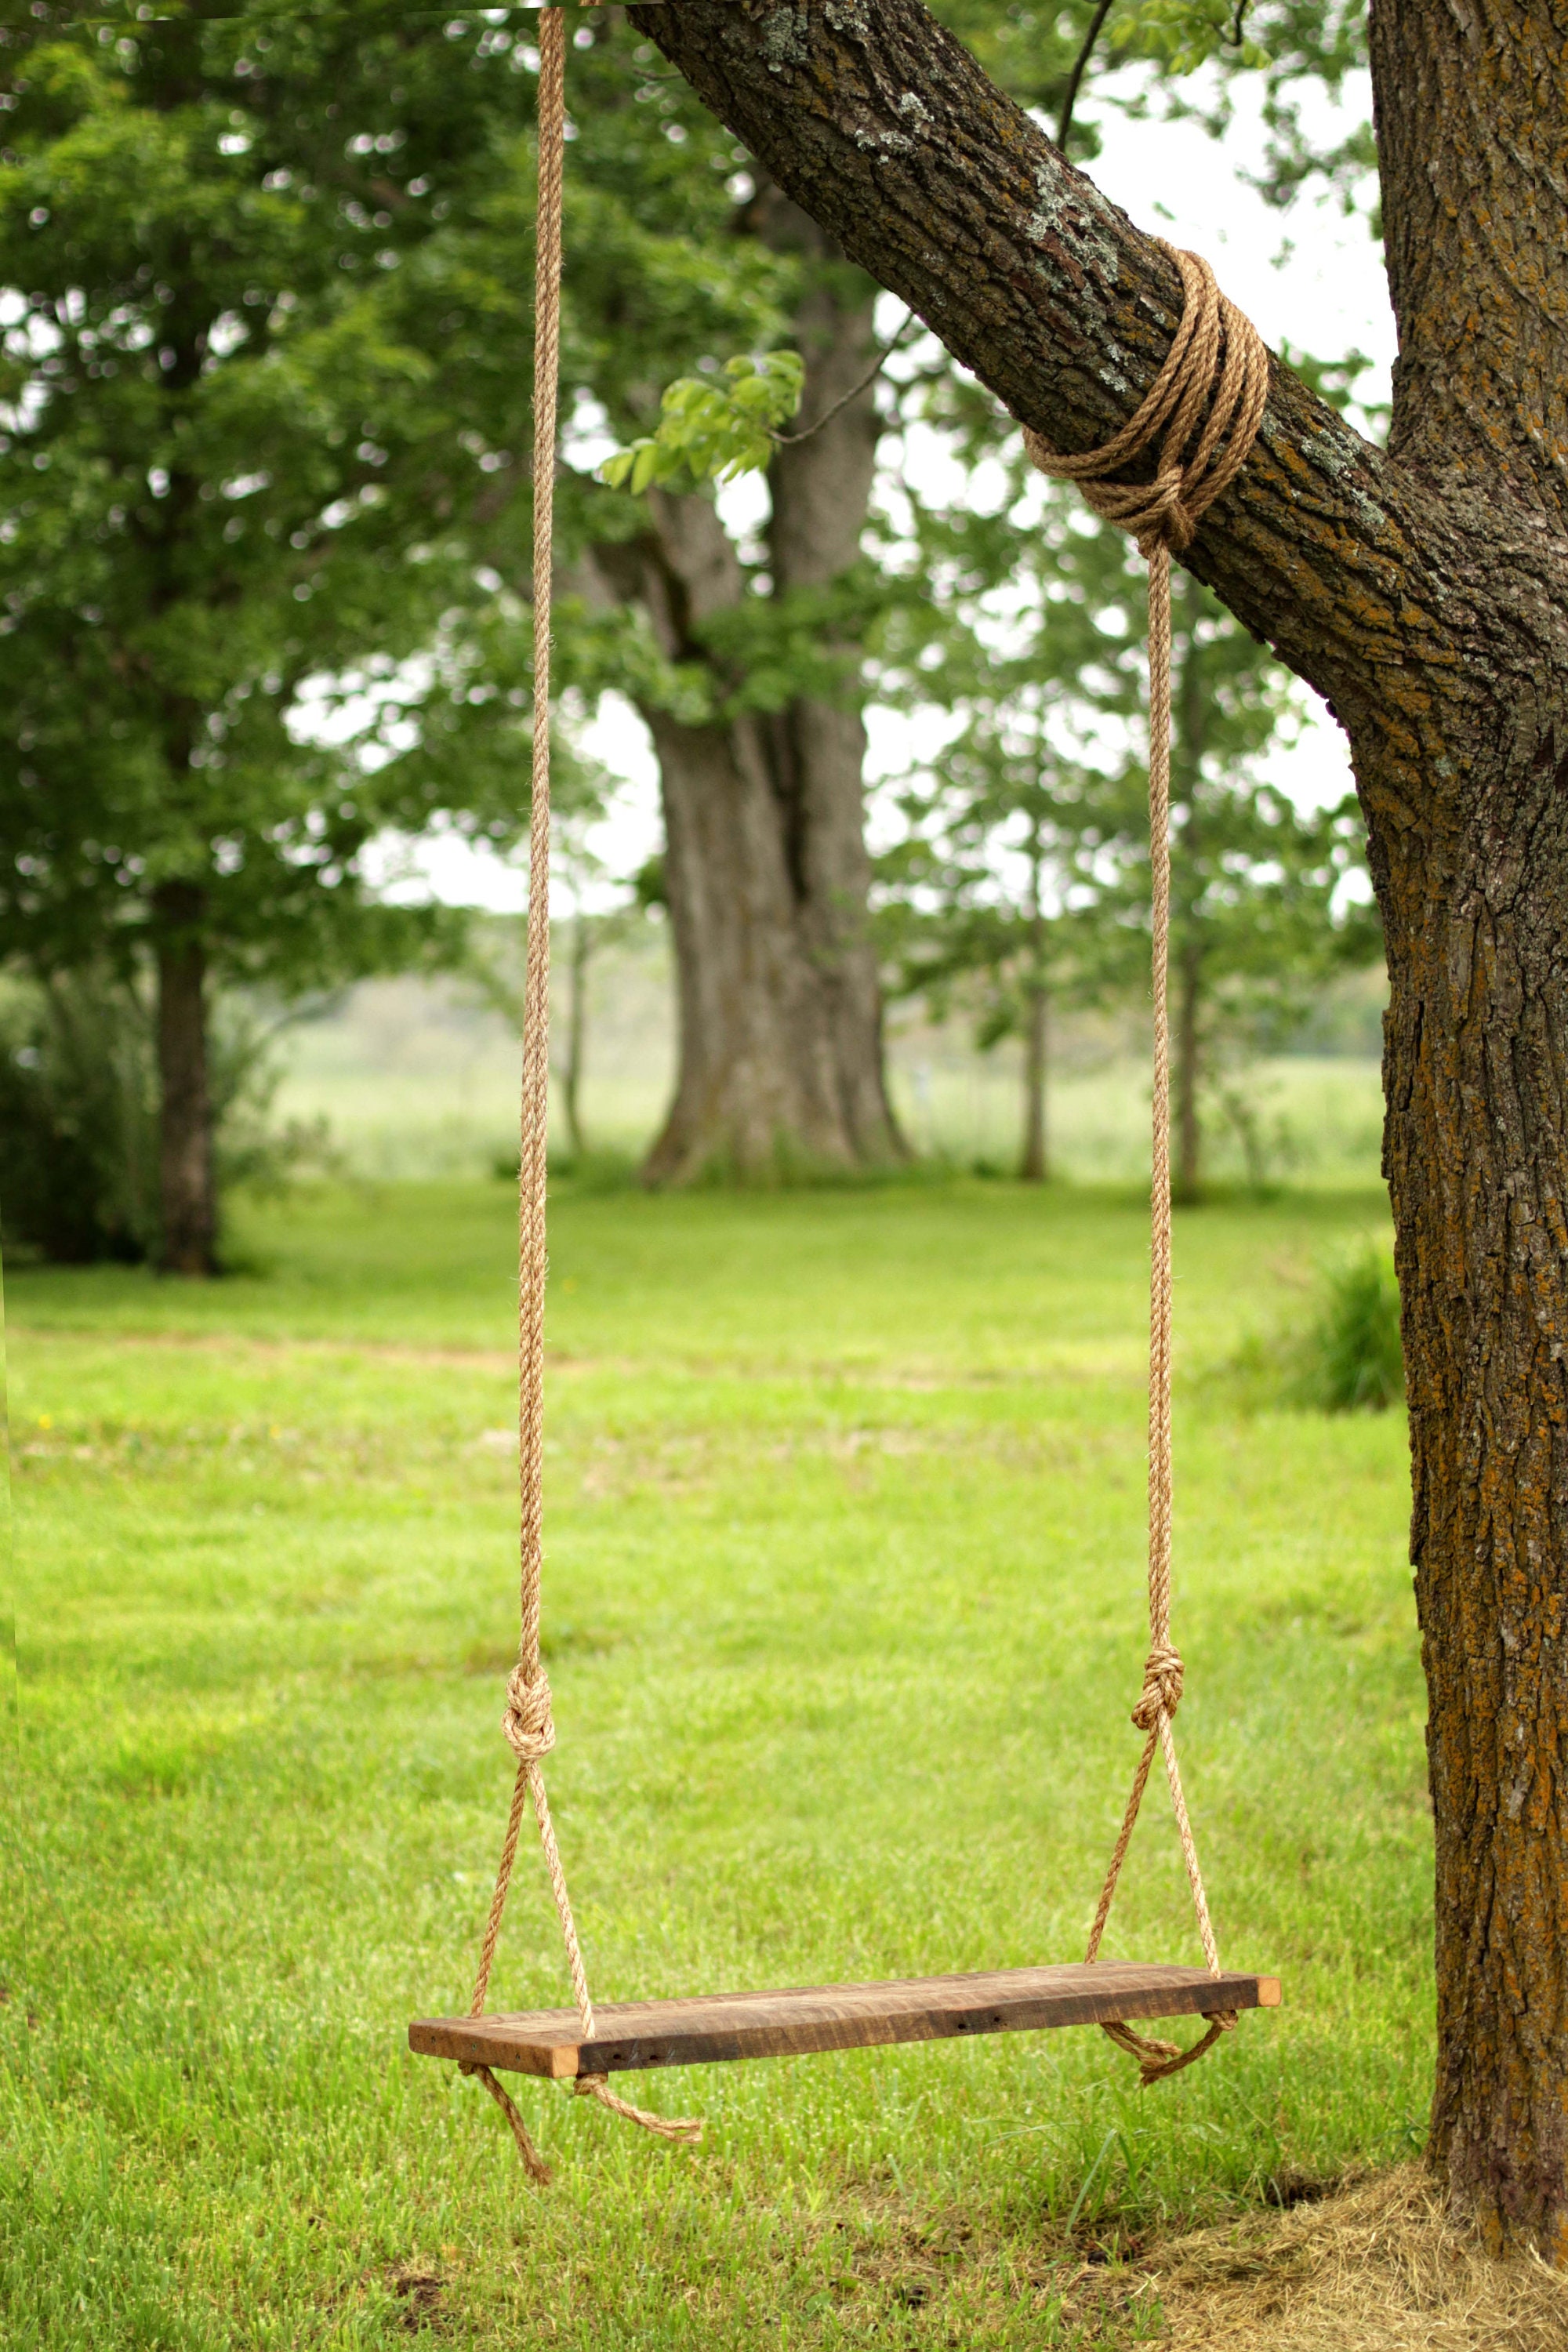 Adult Tree Swing Reclaimed Wood Bench Swing Hanging Rope Swing Rustic Barn Wood  Backyard Porch Country Summer Fun Photo Prop -  Canada